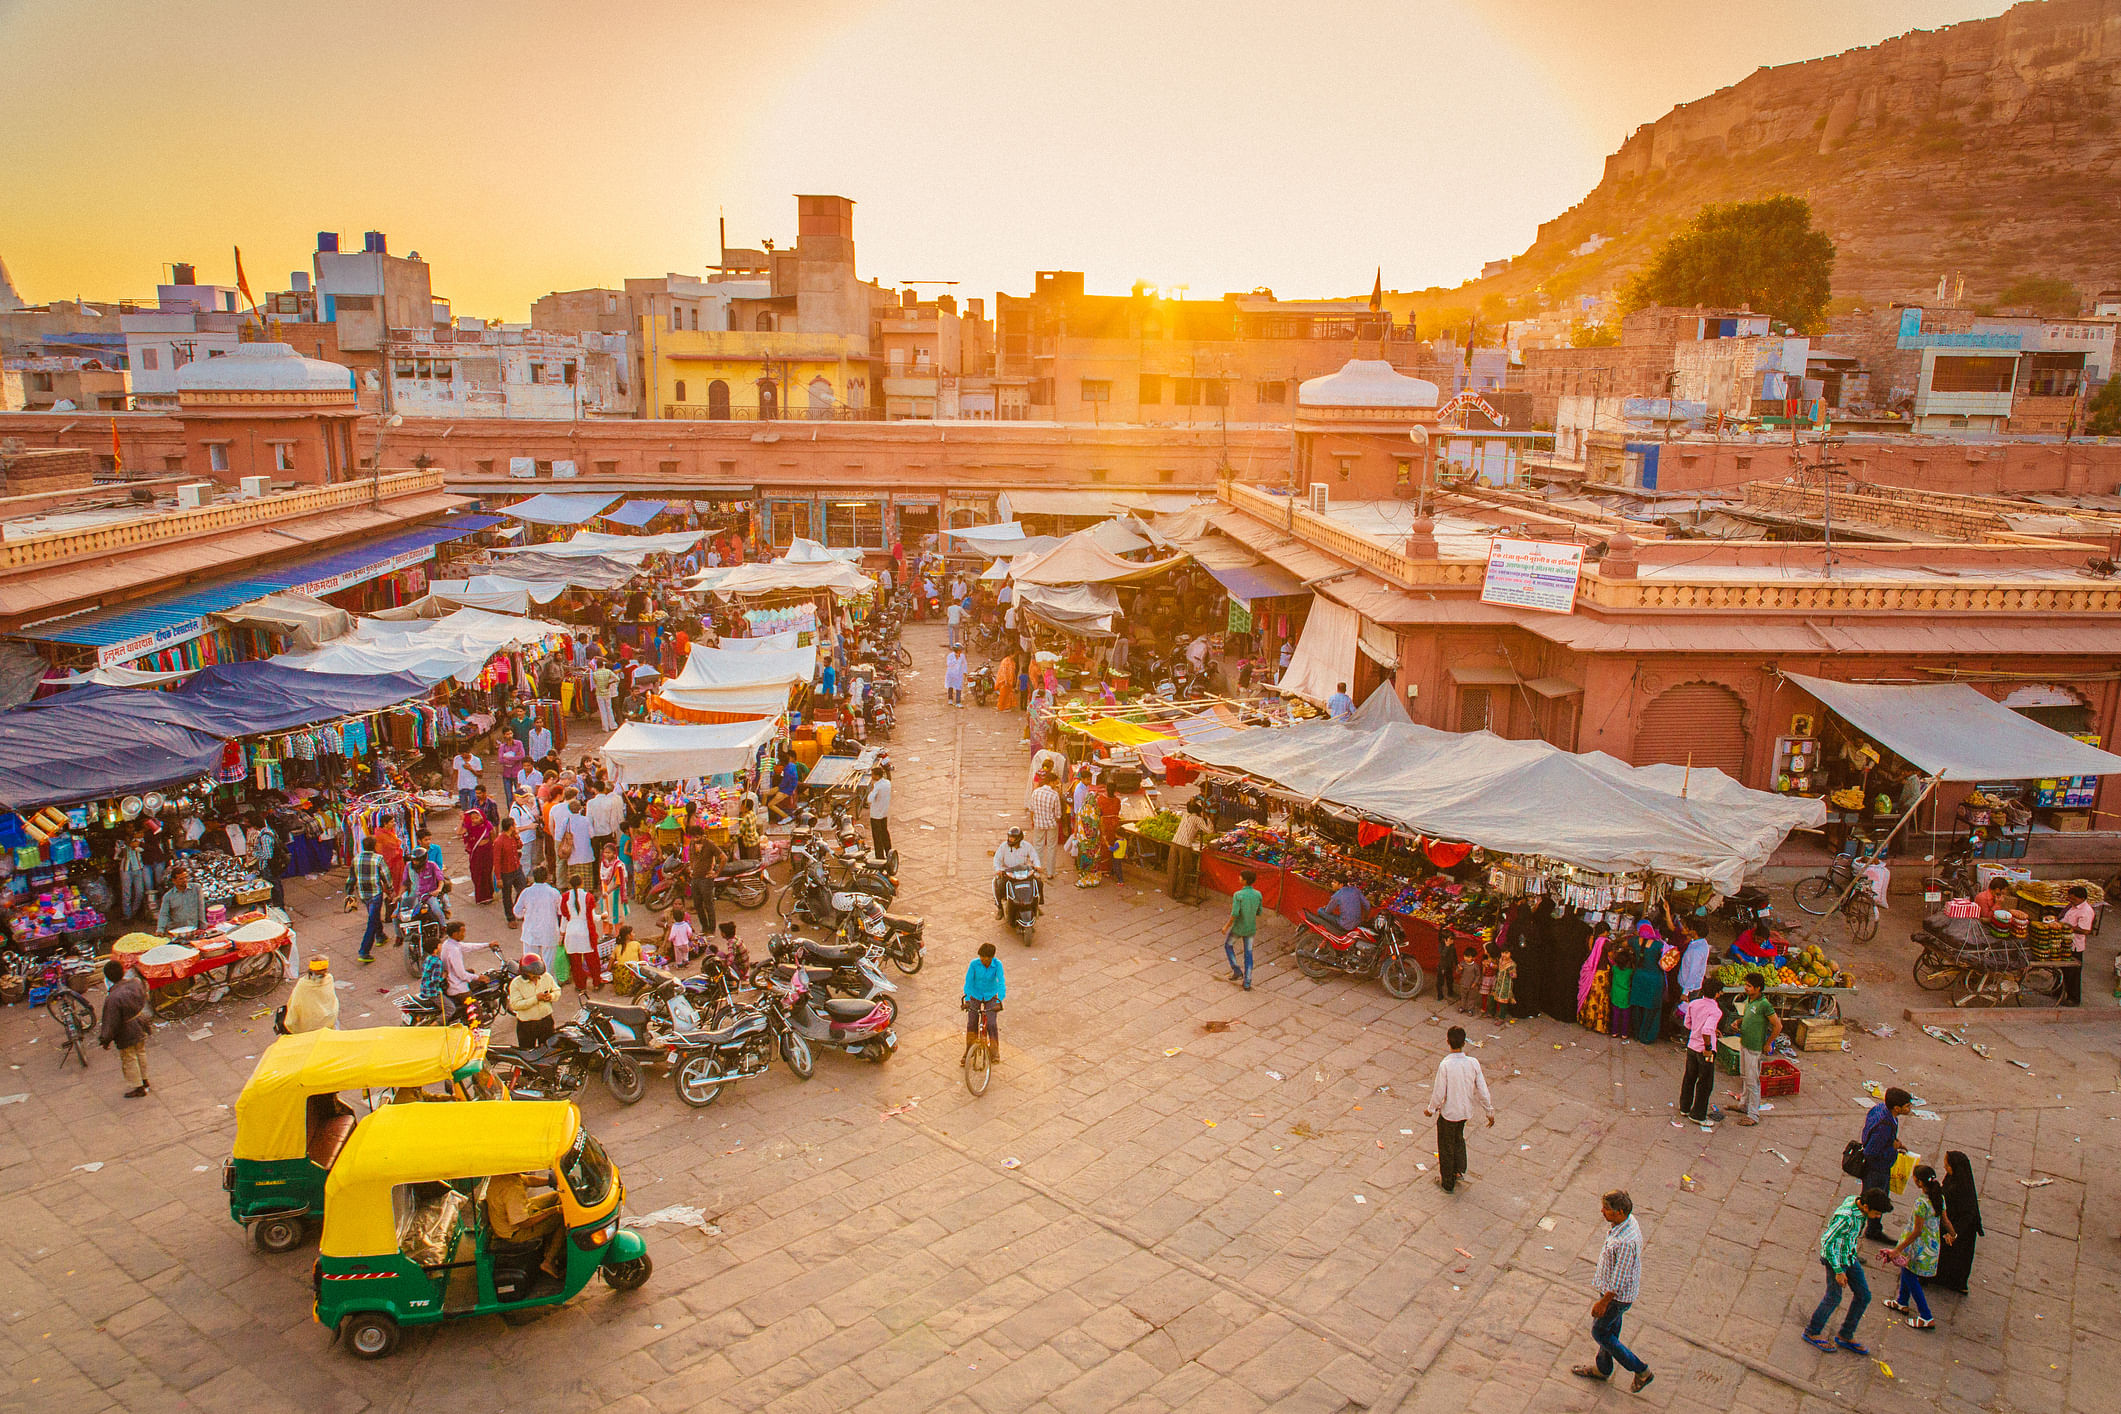 The beautiful market in Jodhpur’s Old City. Photo credit: Getty Images.